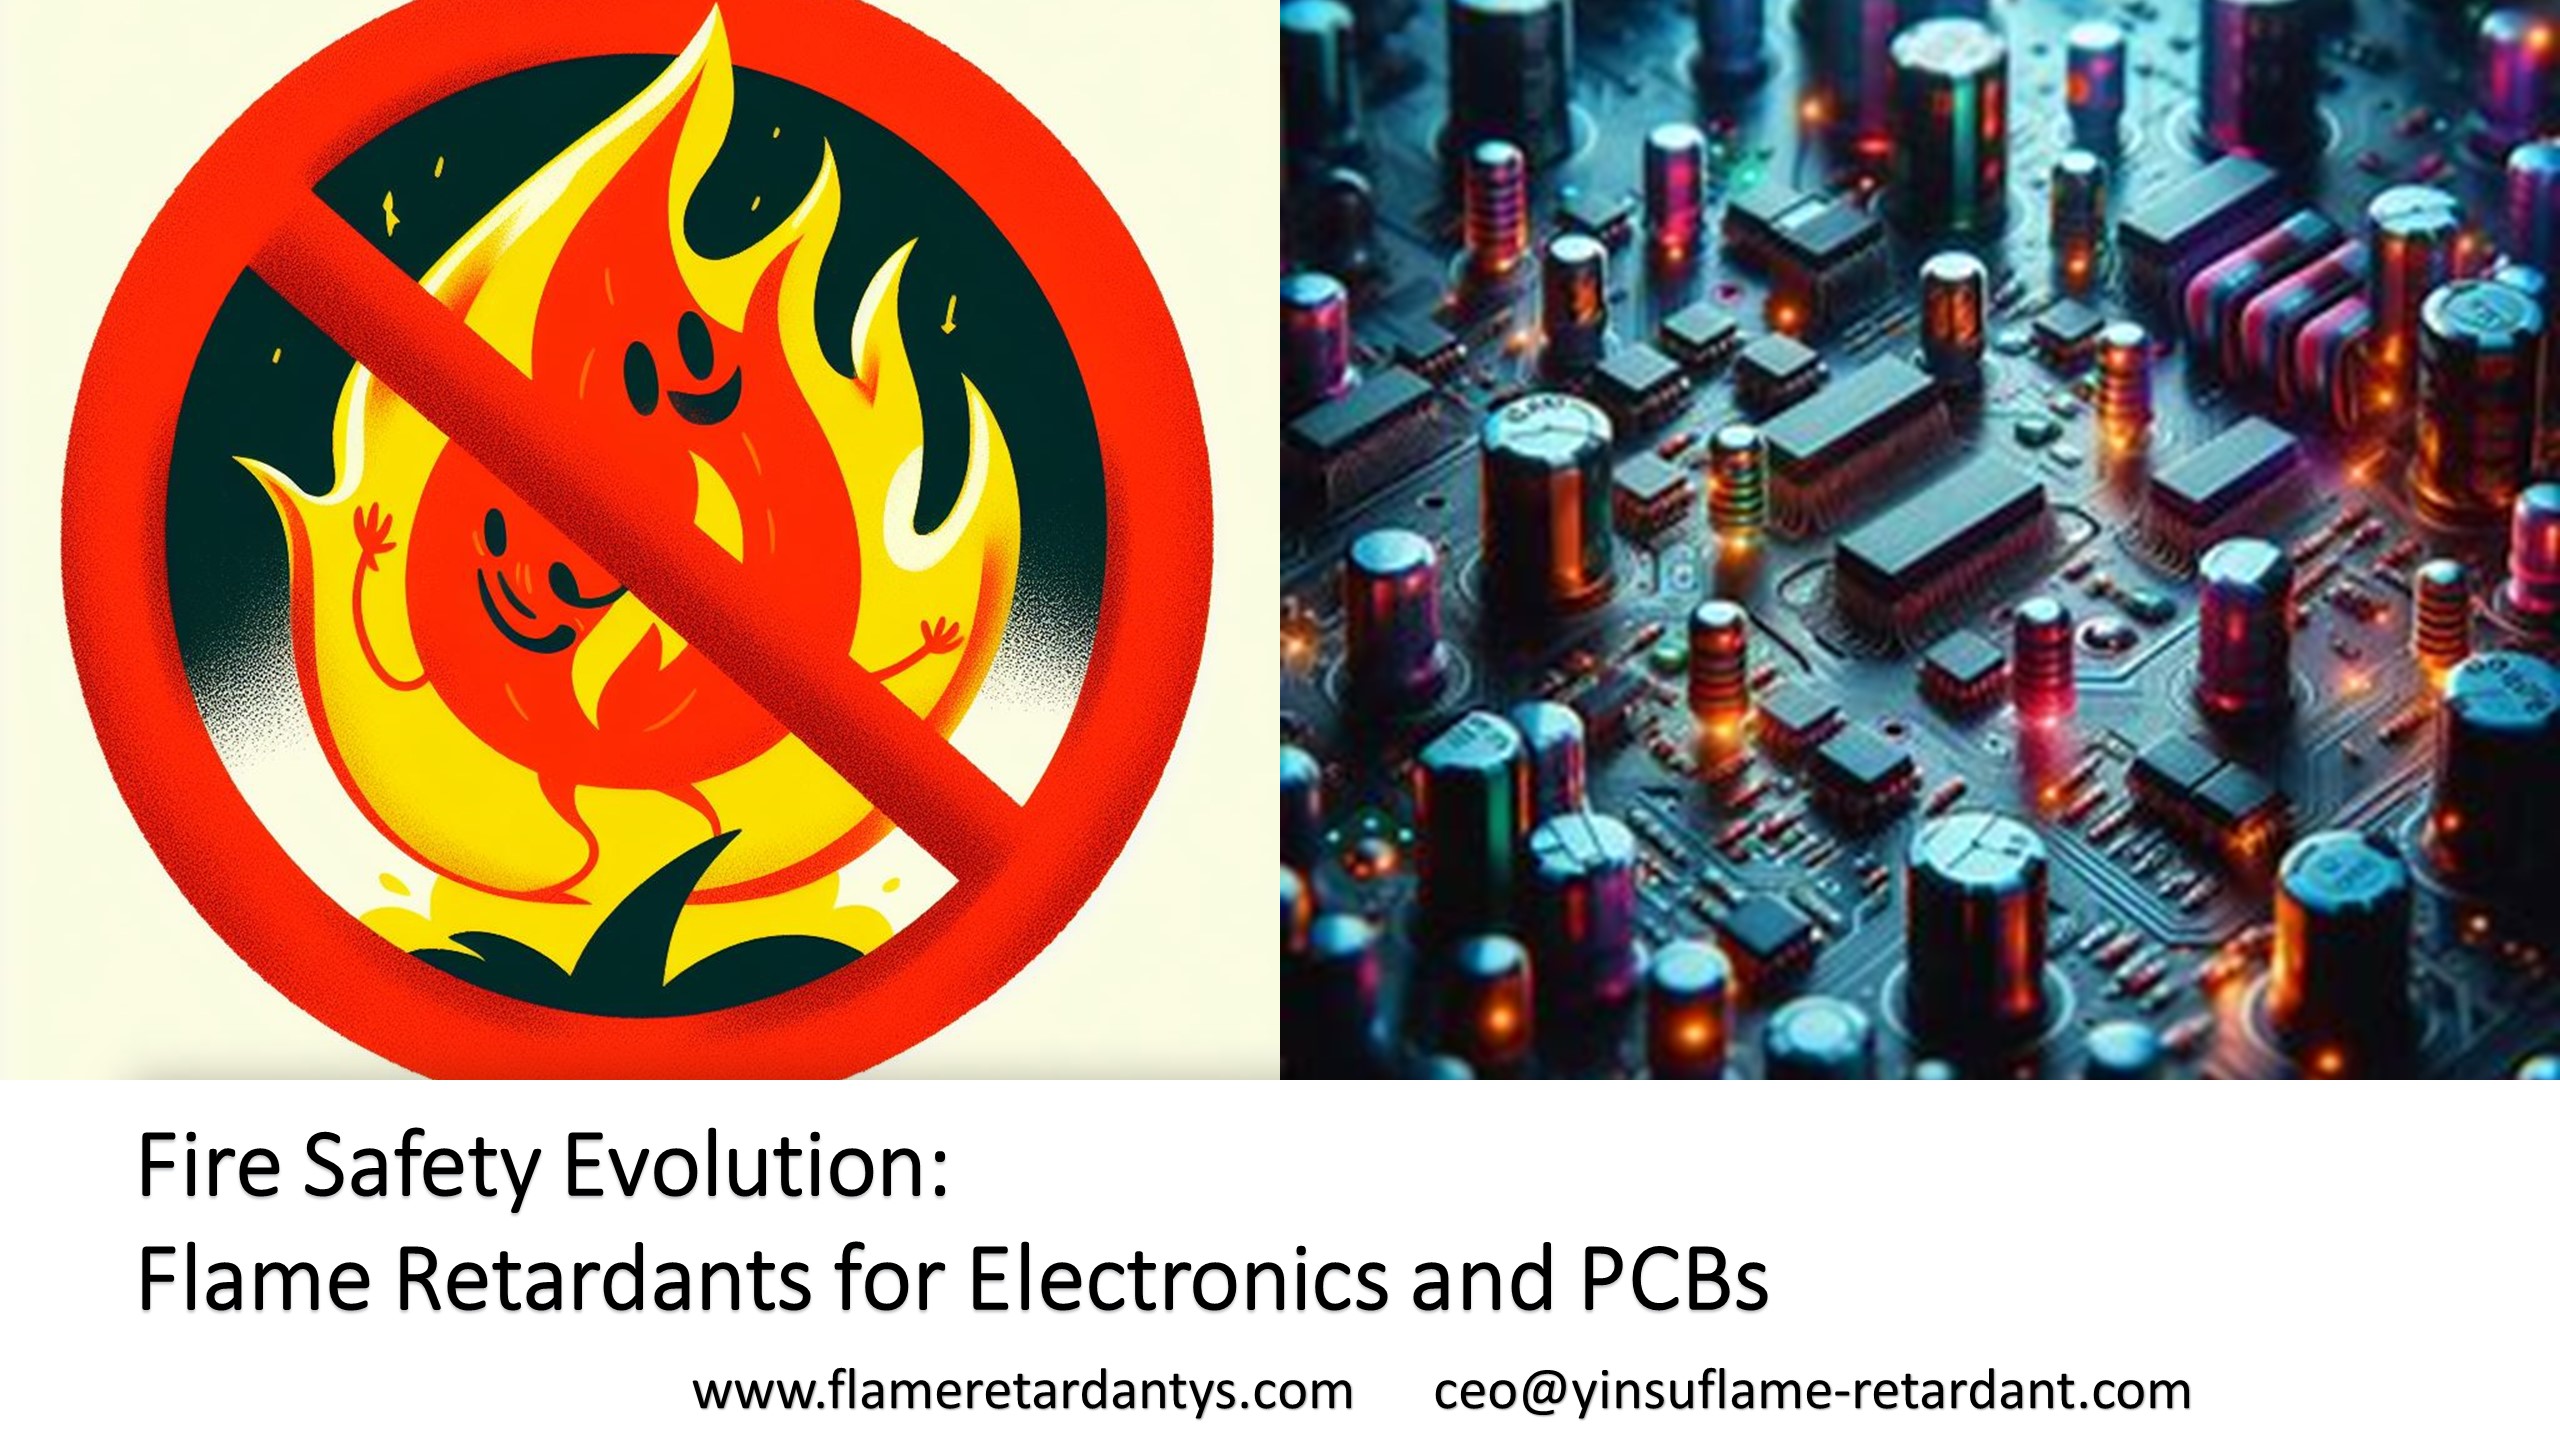 Fire Safety Evolution Flame Retardants for Electronics and PCBs